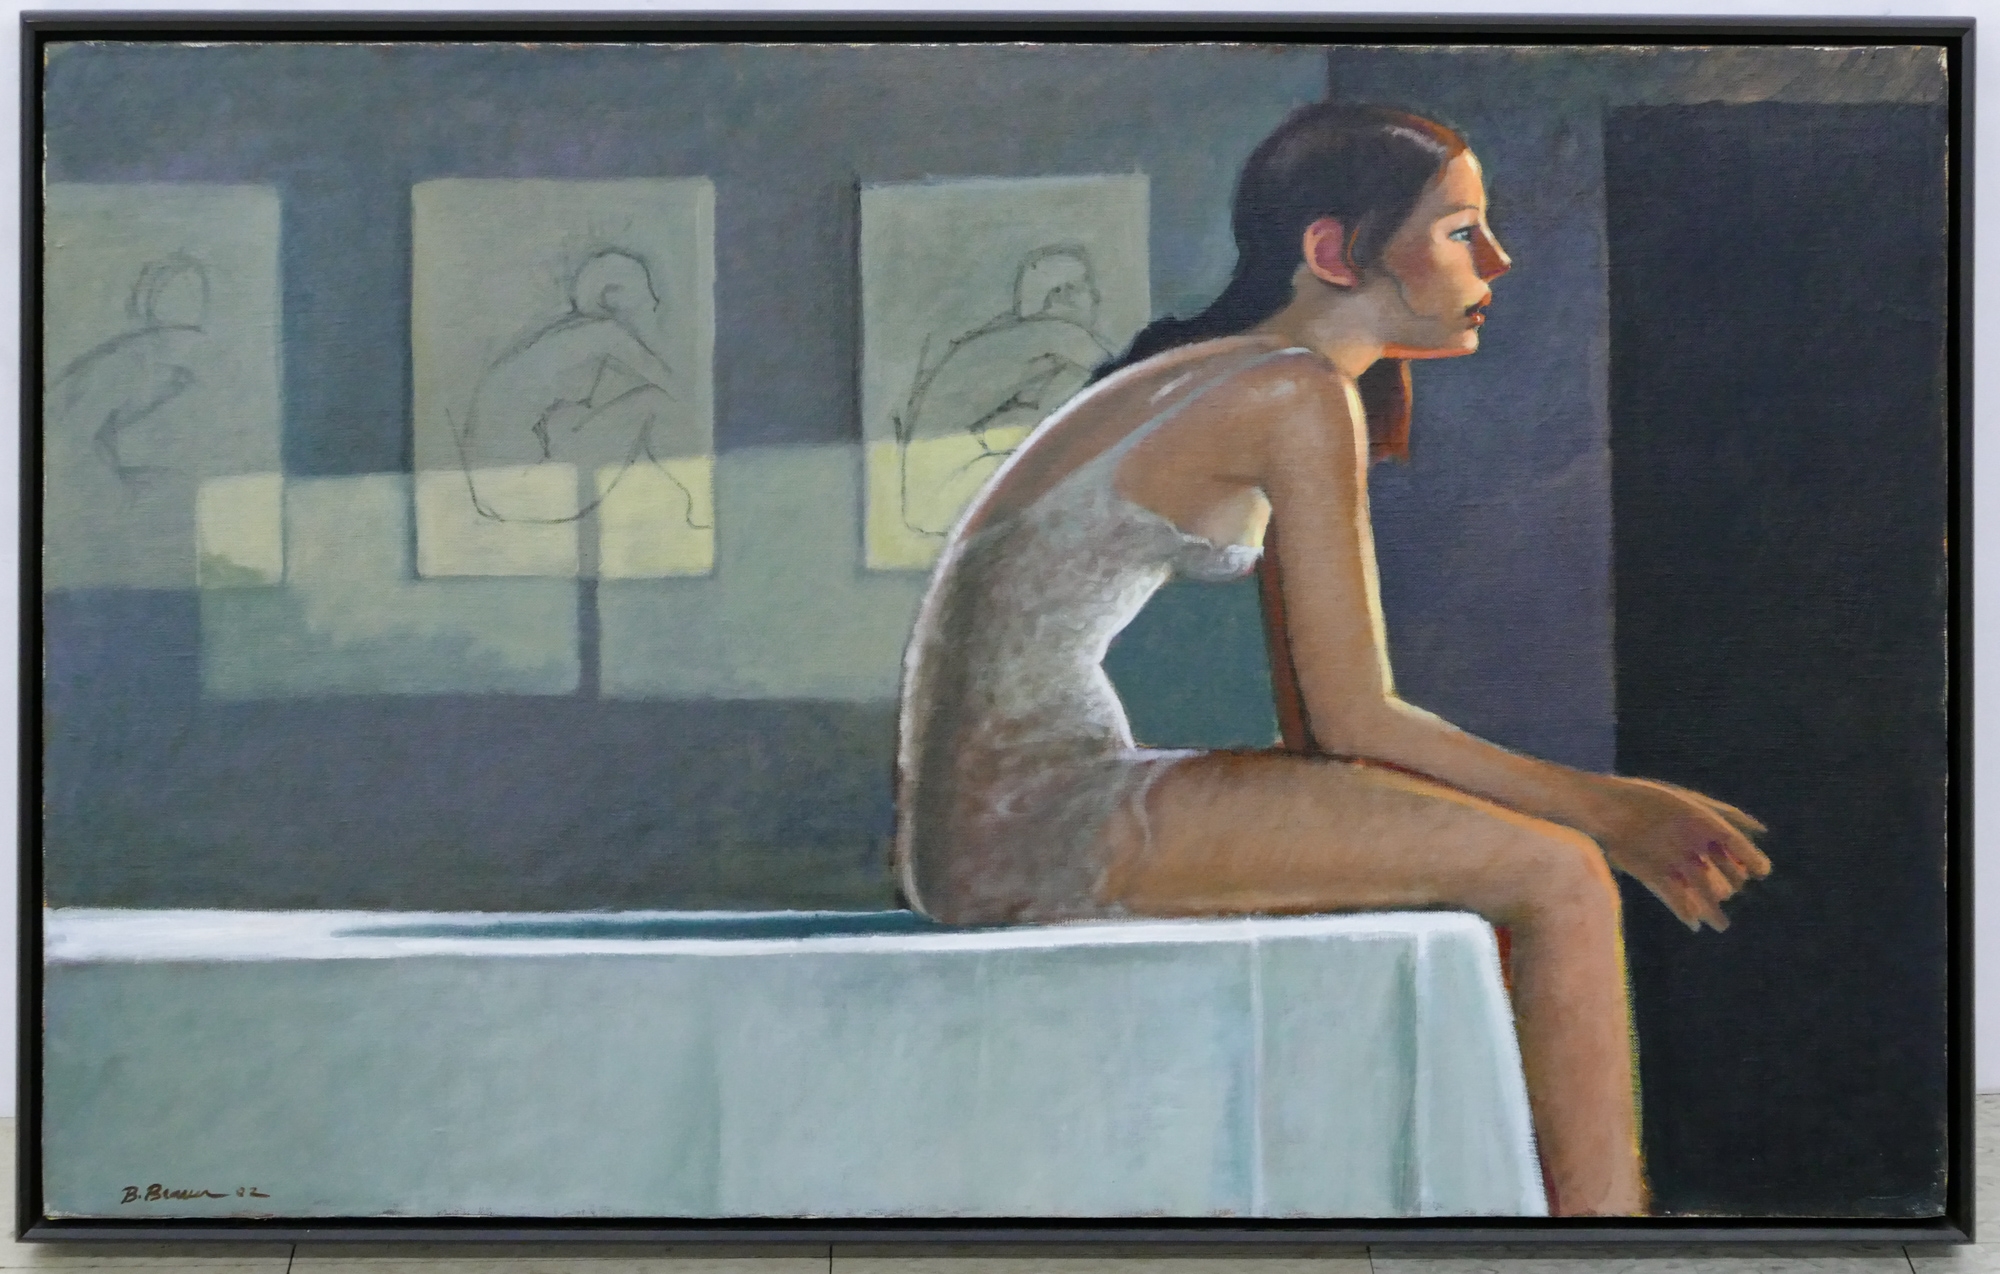 Artwork by Bill Brauer, Bill Brauer ''Study'' (Seated Girl) 2002 Oil, Made of Oil on Canvas